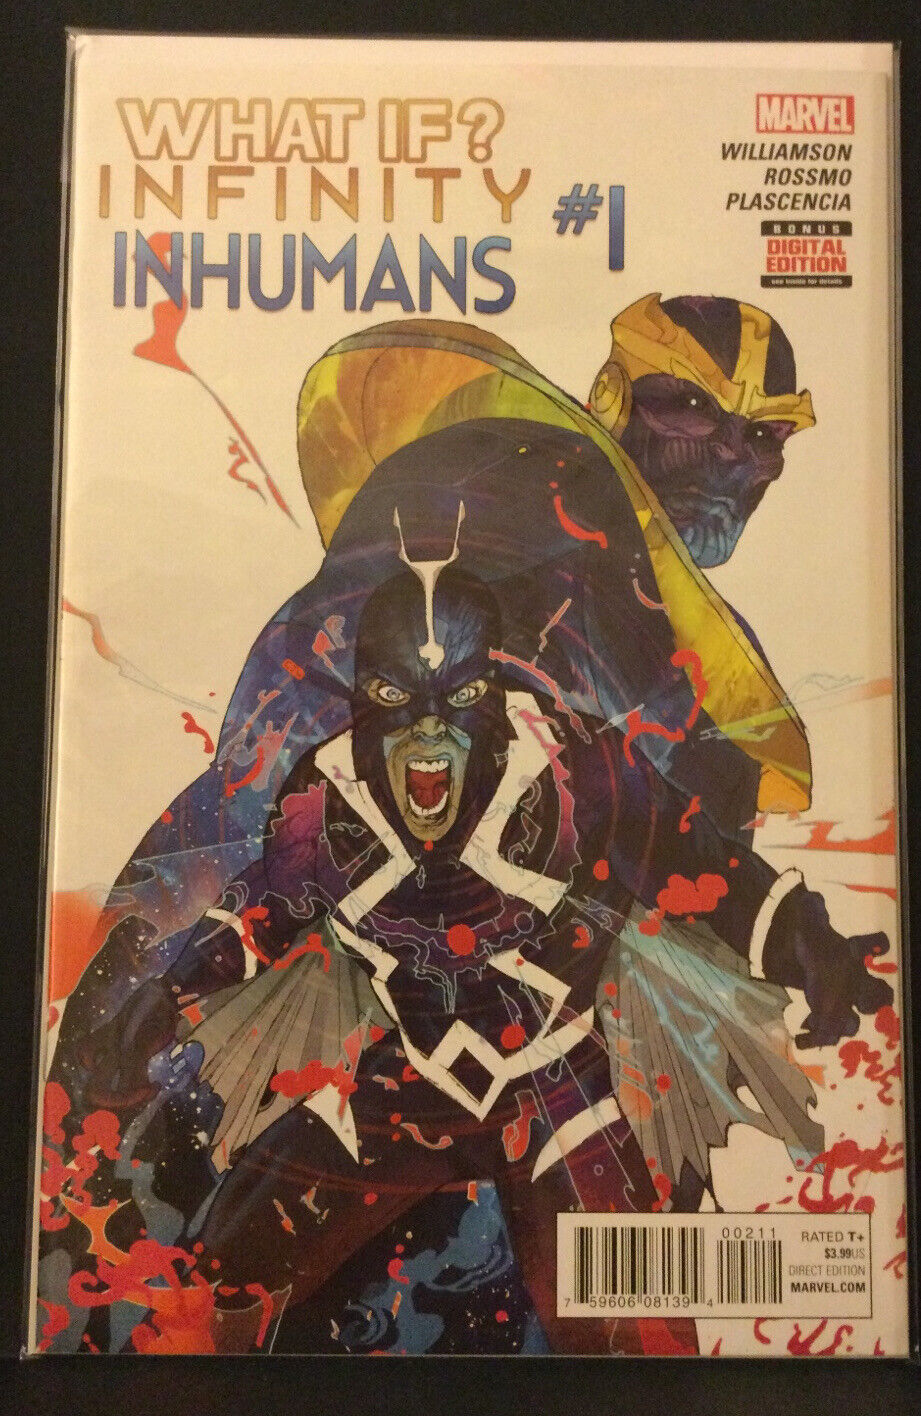 What If? Infinity - Inhumans - #1 - Marvel - 2015 - VF/NM